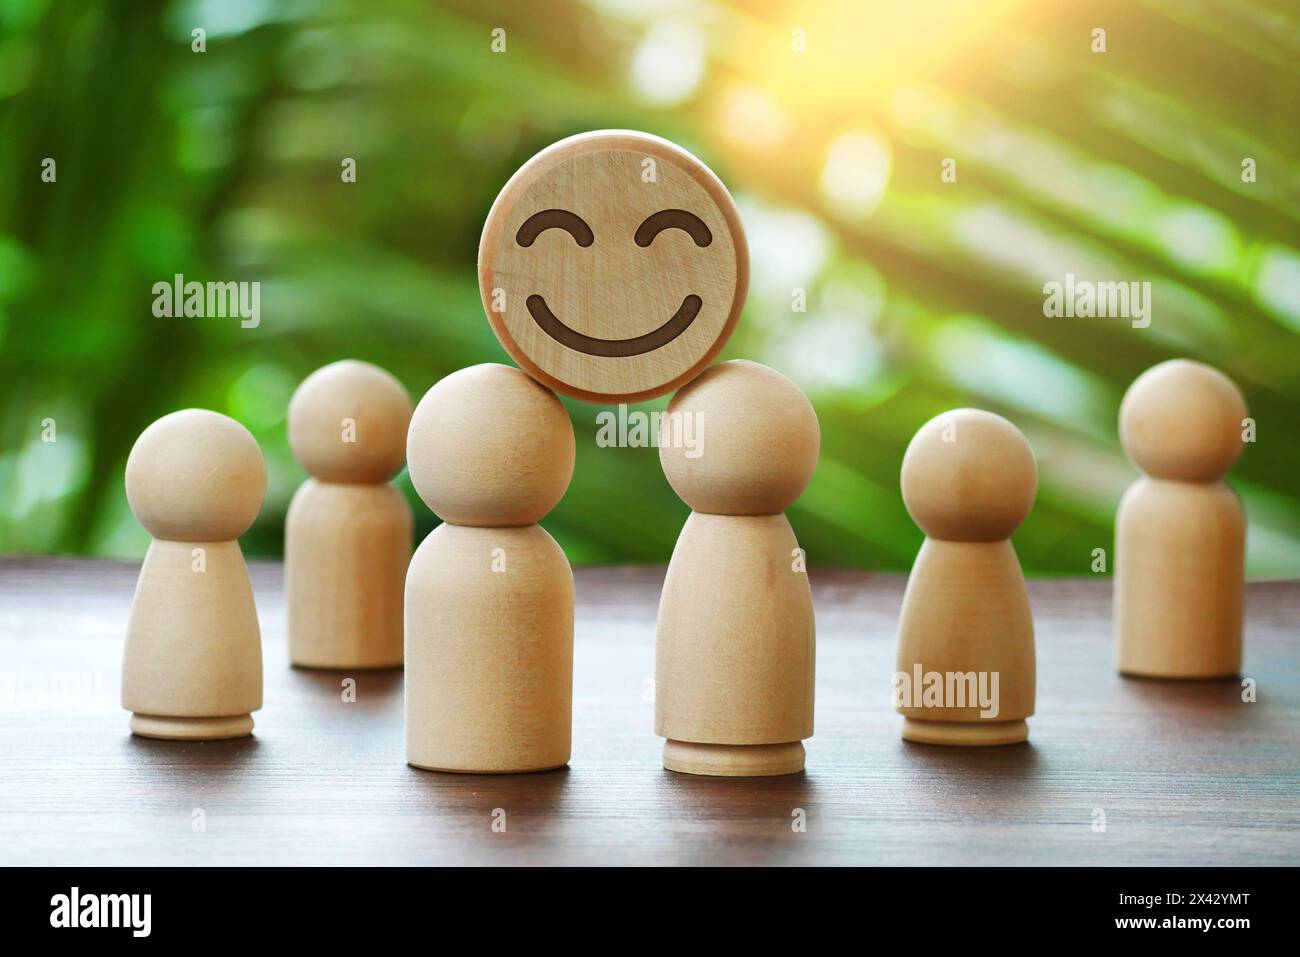 Wooden doll and smiley face emoticon ball kay. Concept for assessment. Service ratings, feedback, satisfaction and mental health concepts Stock Photo